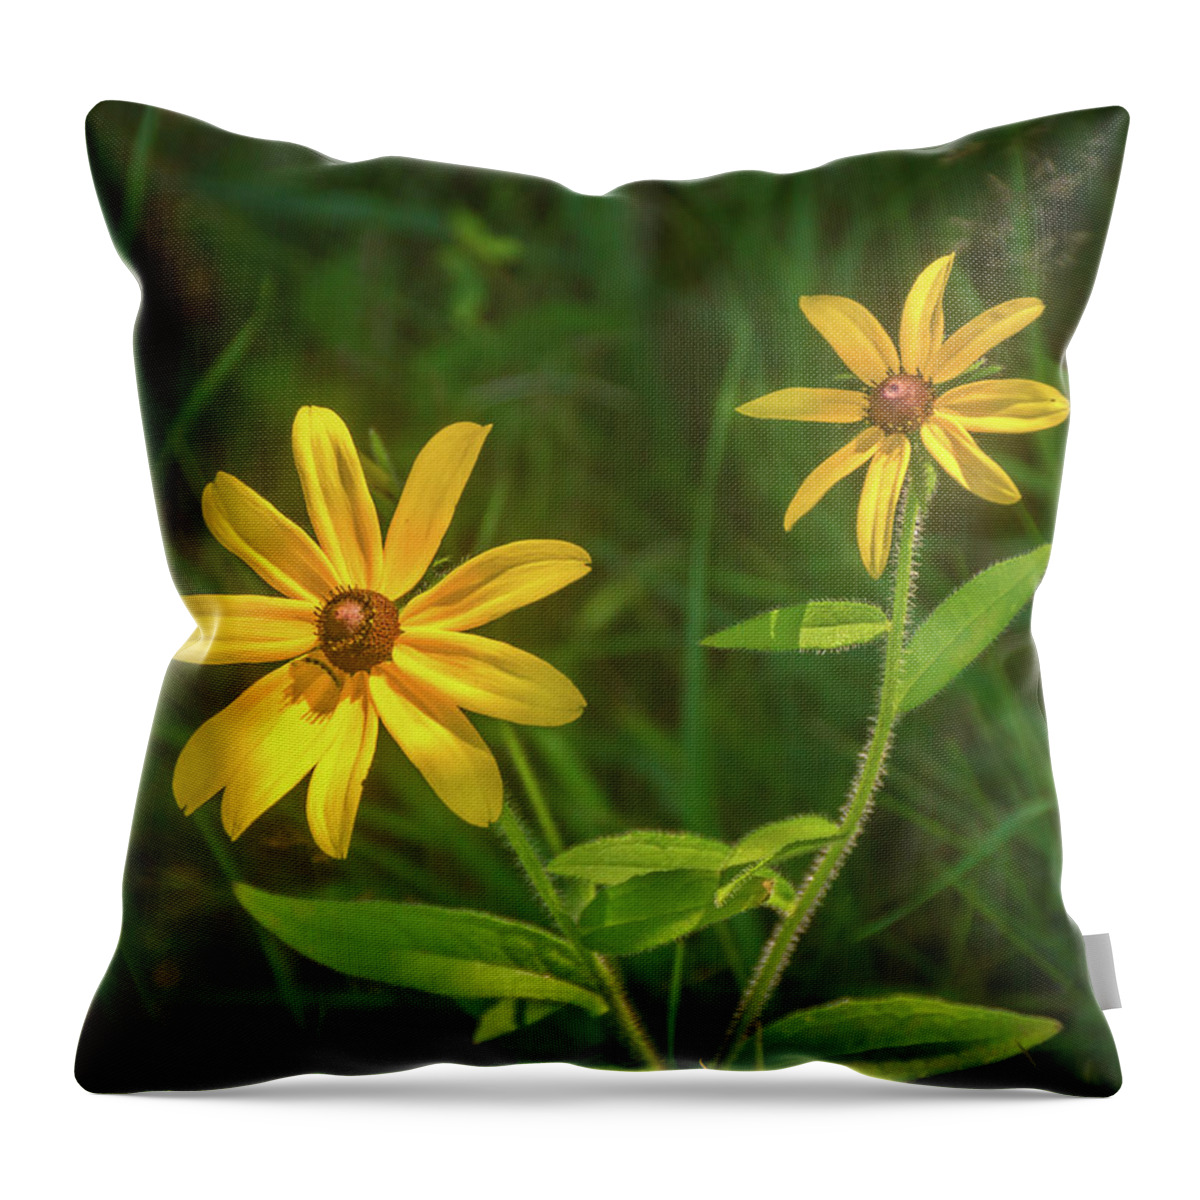 Wildflower Throw Pillow featuring the photograph Wild Pair by Bill Pevlor